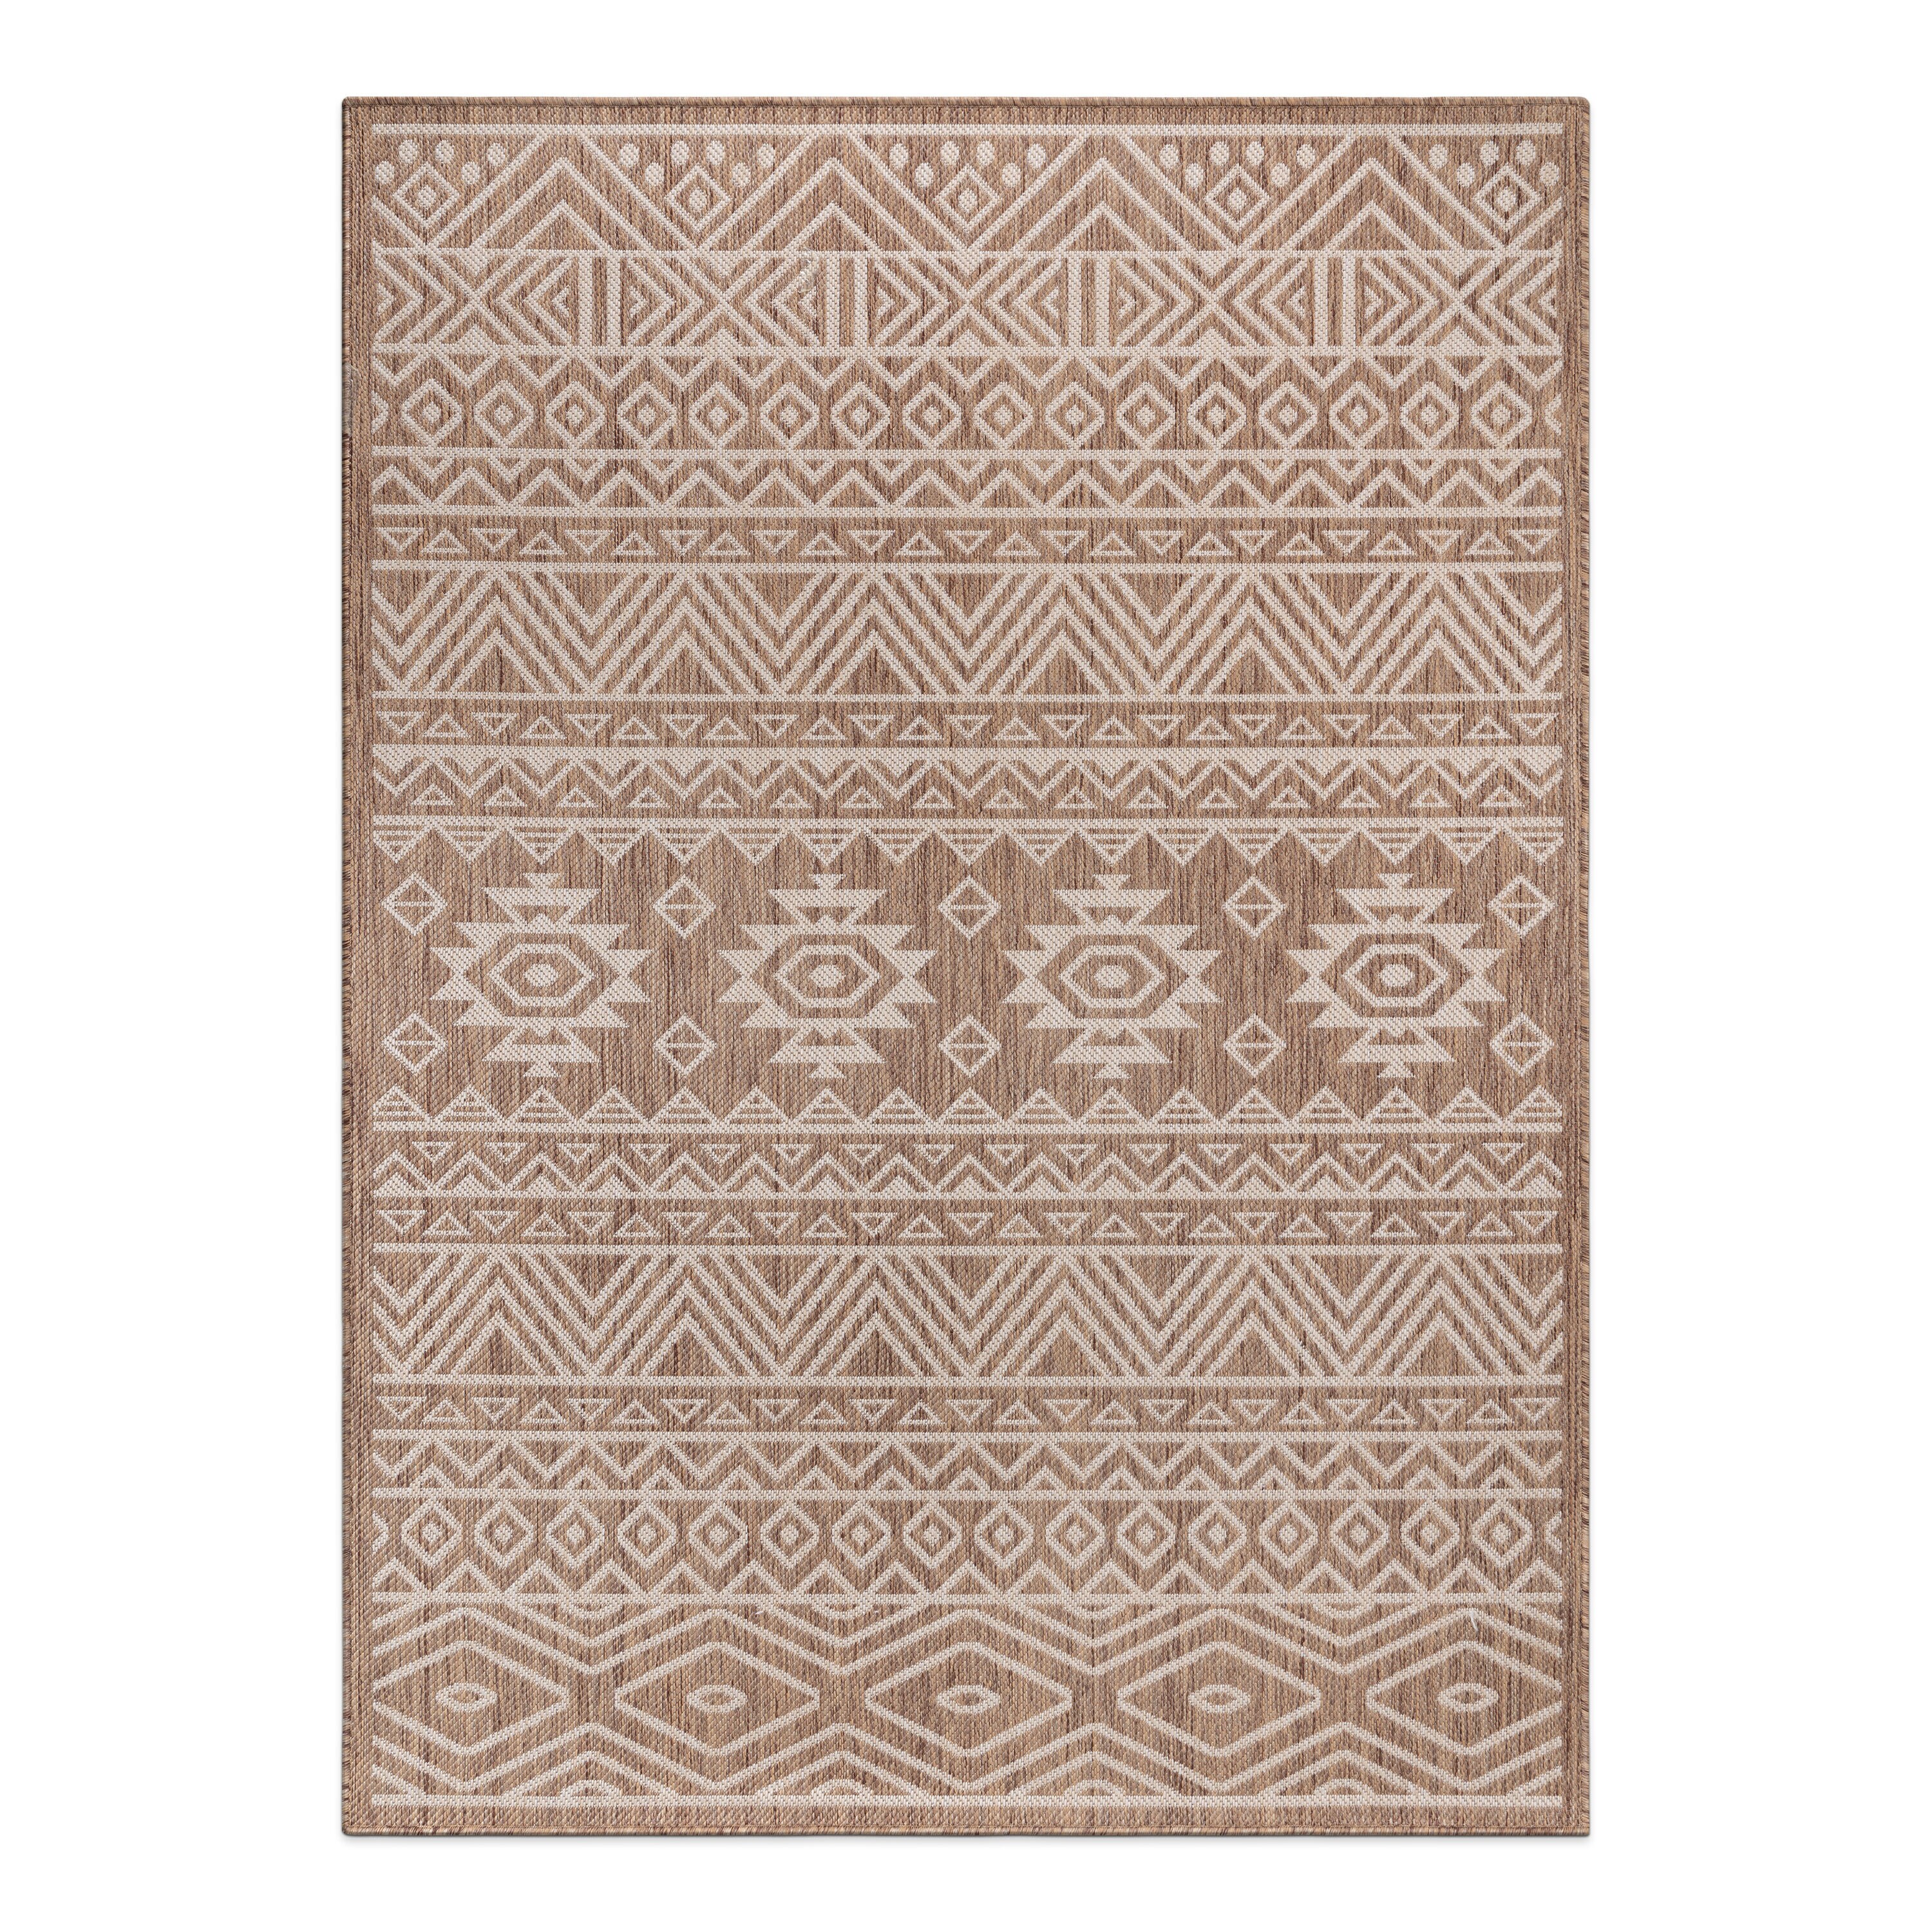 Well Woven Non-Slip Rubber Backing 5x7 (5' x 7') Traditional Rug Brown  Multi Color Thin Pile Machine Washable Indoor/Outdoor Area Rug